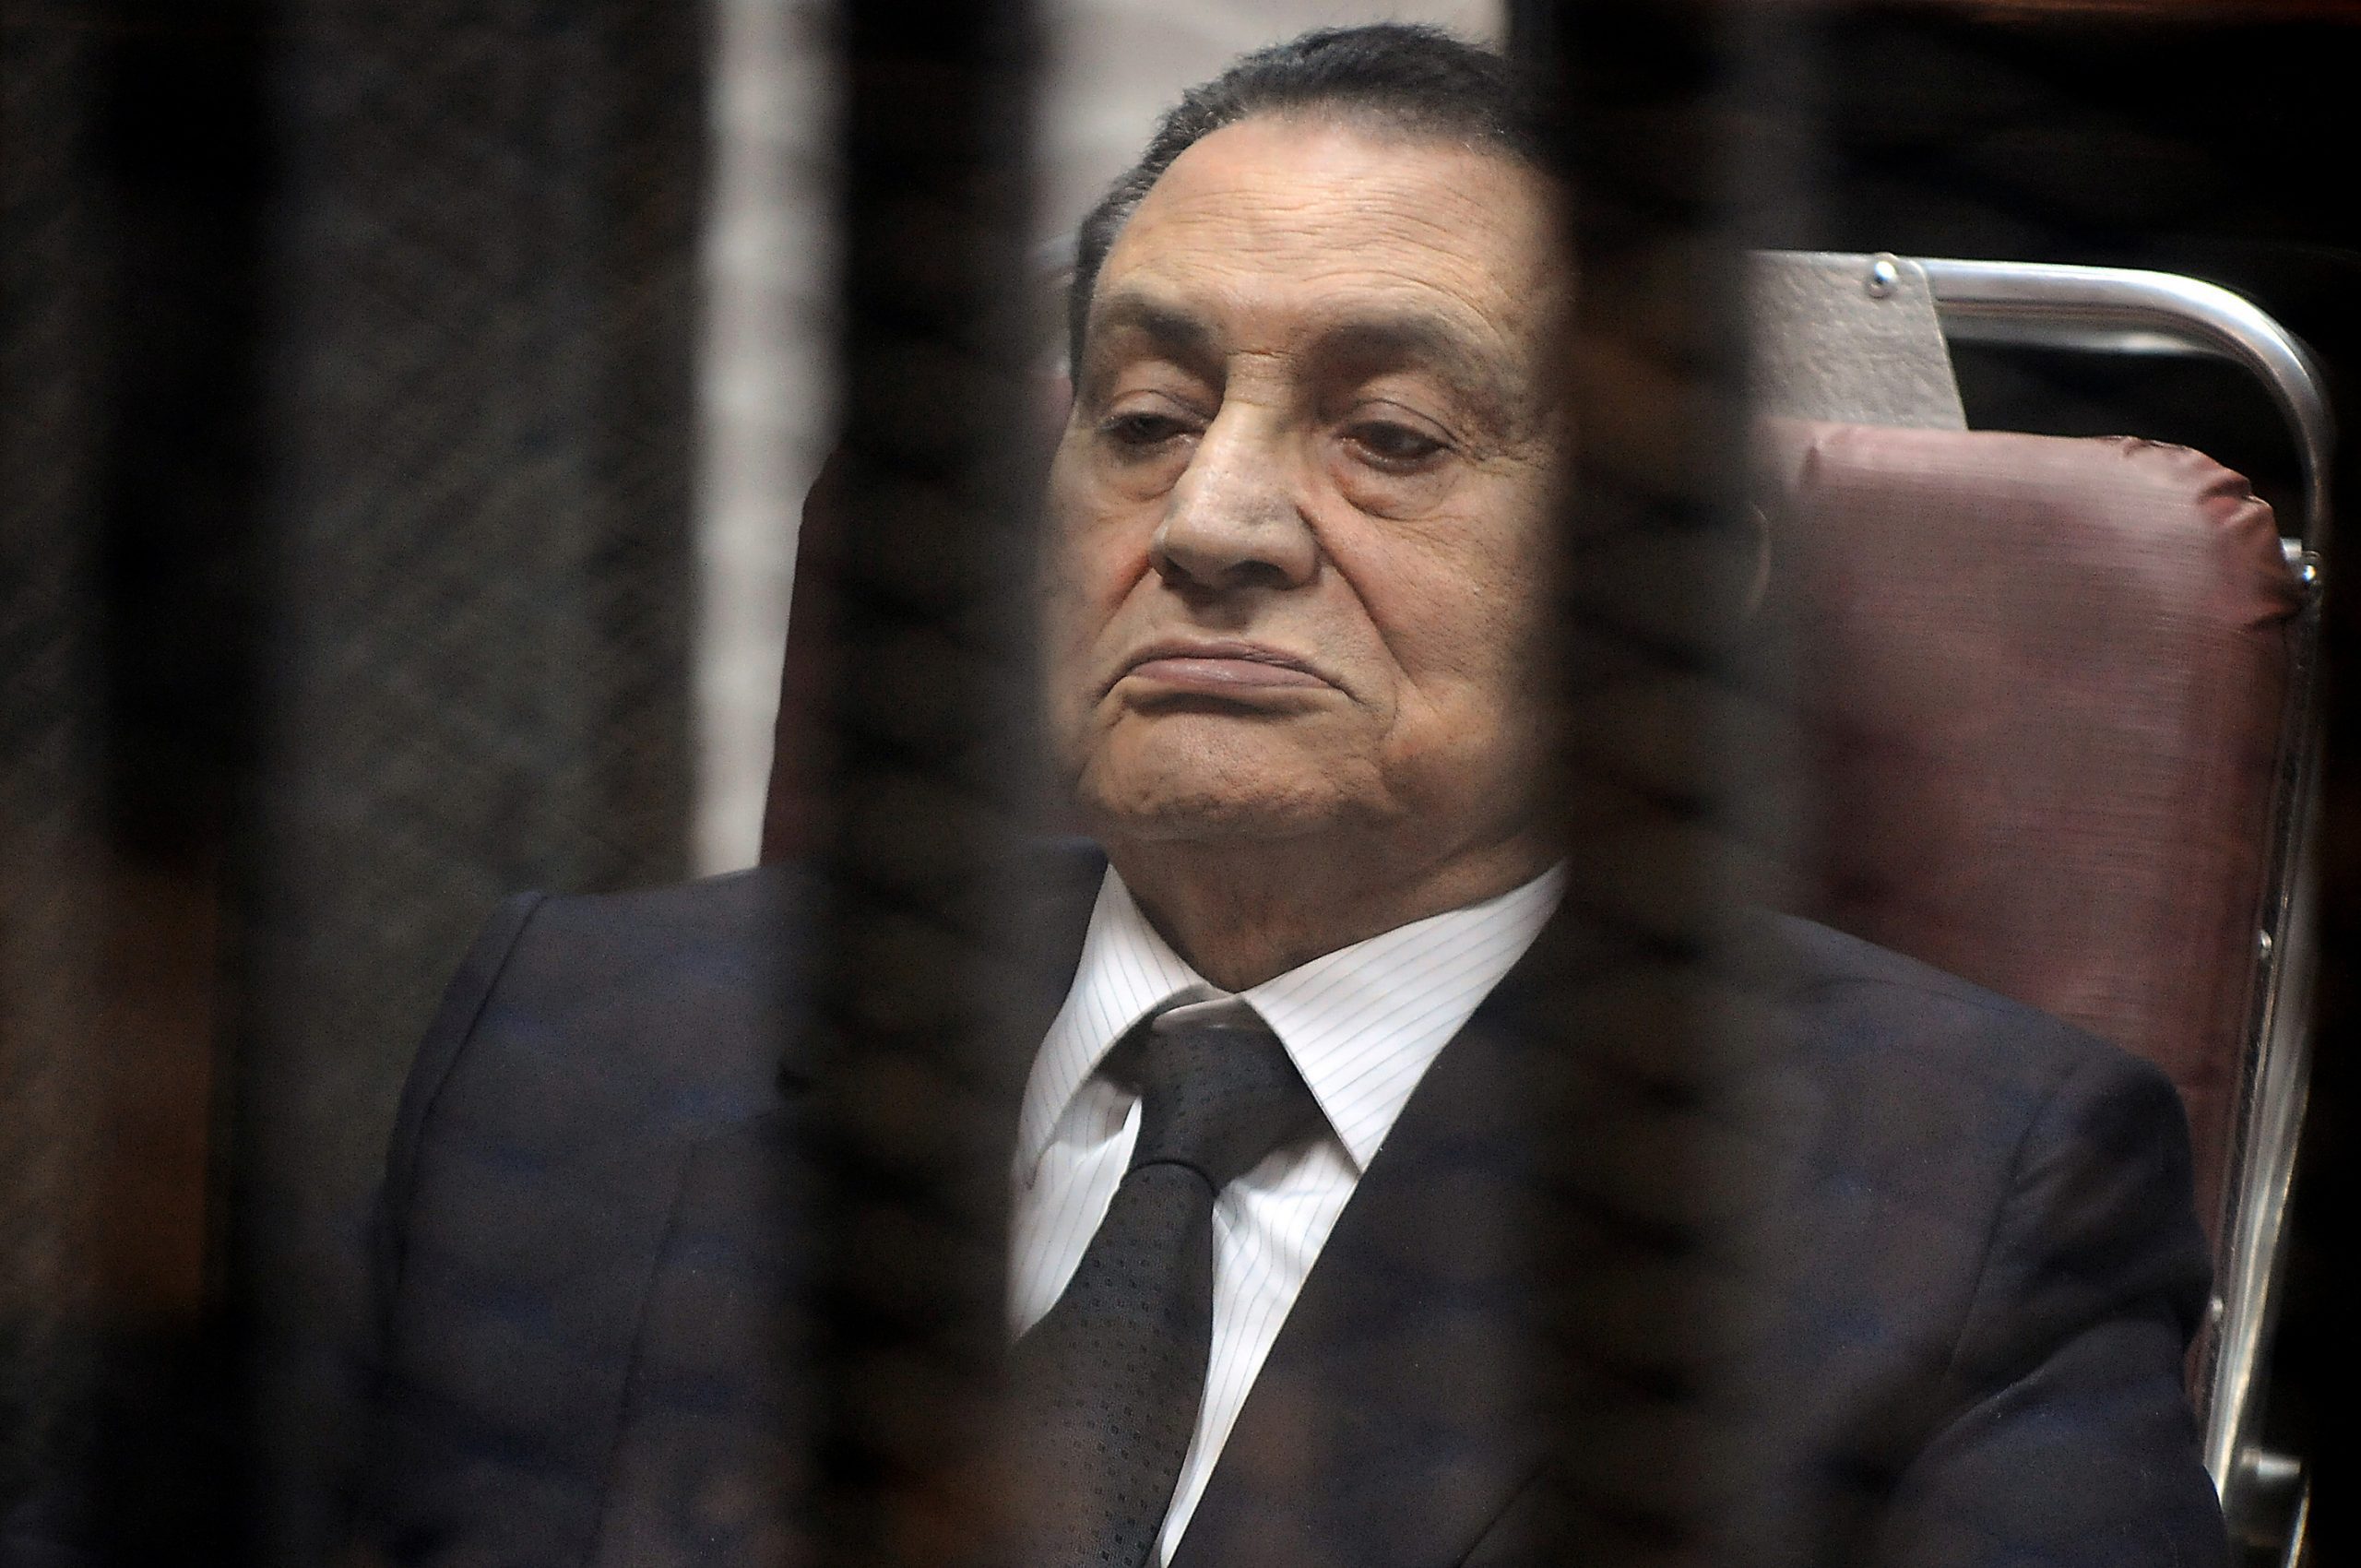 Ousted president Mubarak's trial